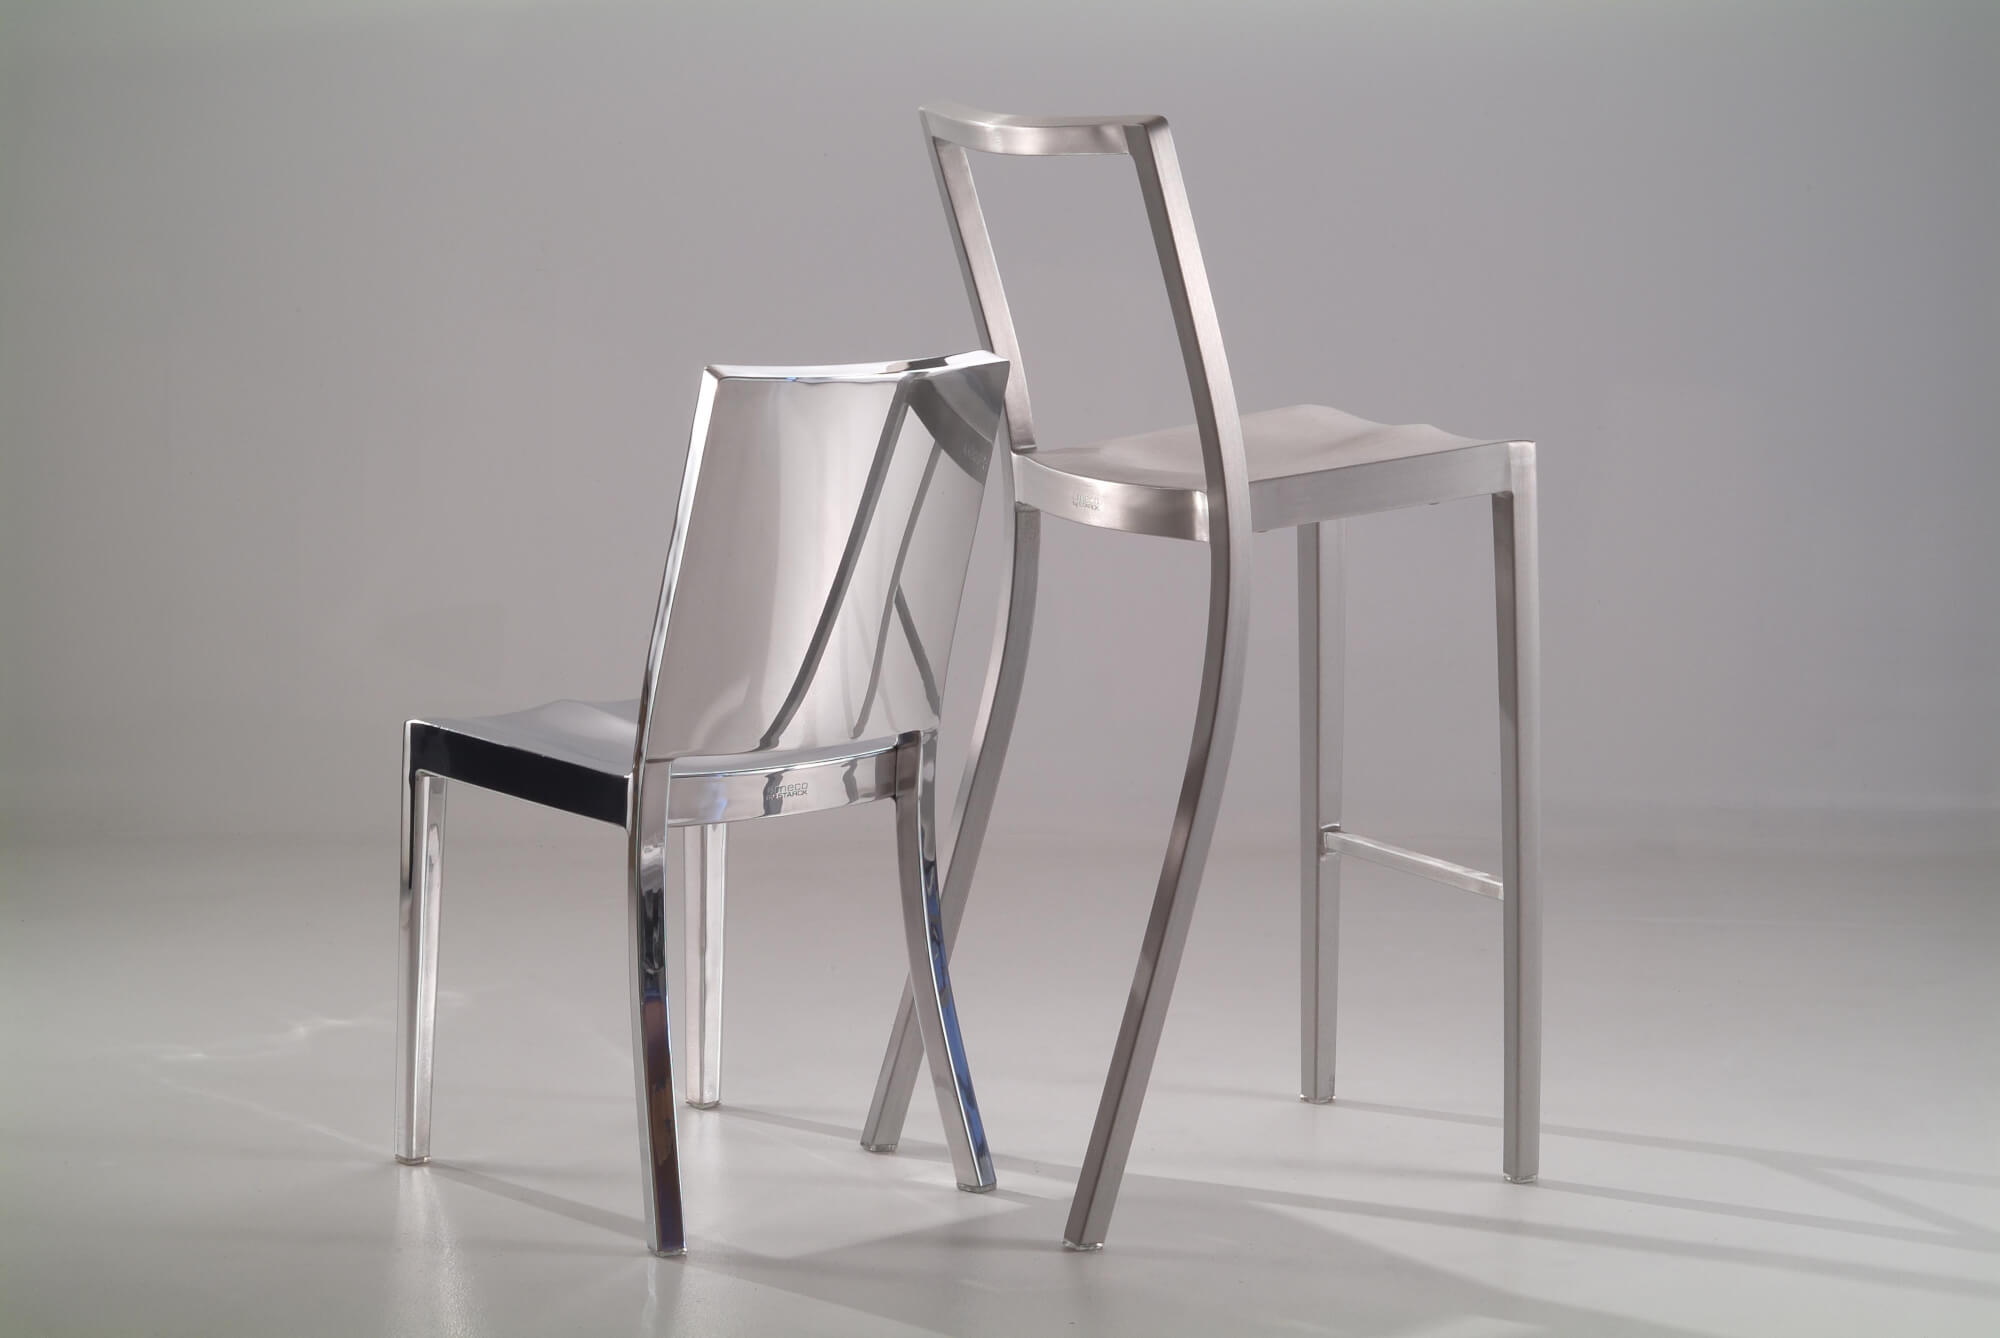 Philippe Starck and Emeco - A Long Lasting Collaboration - 